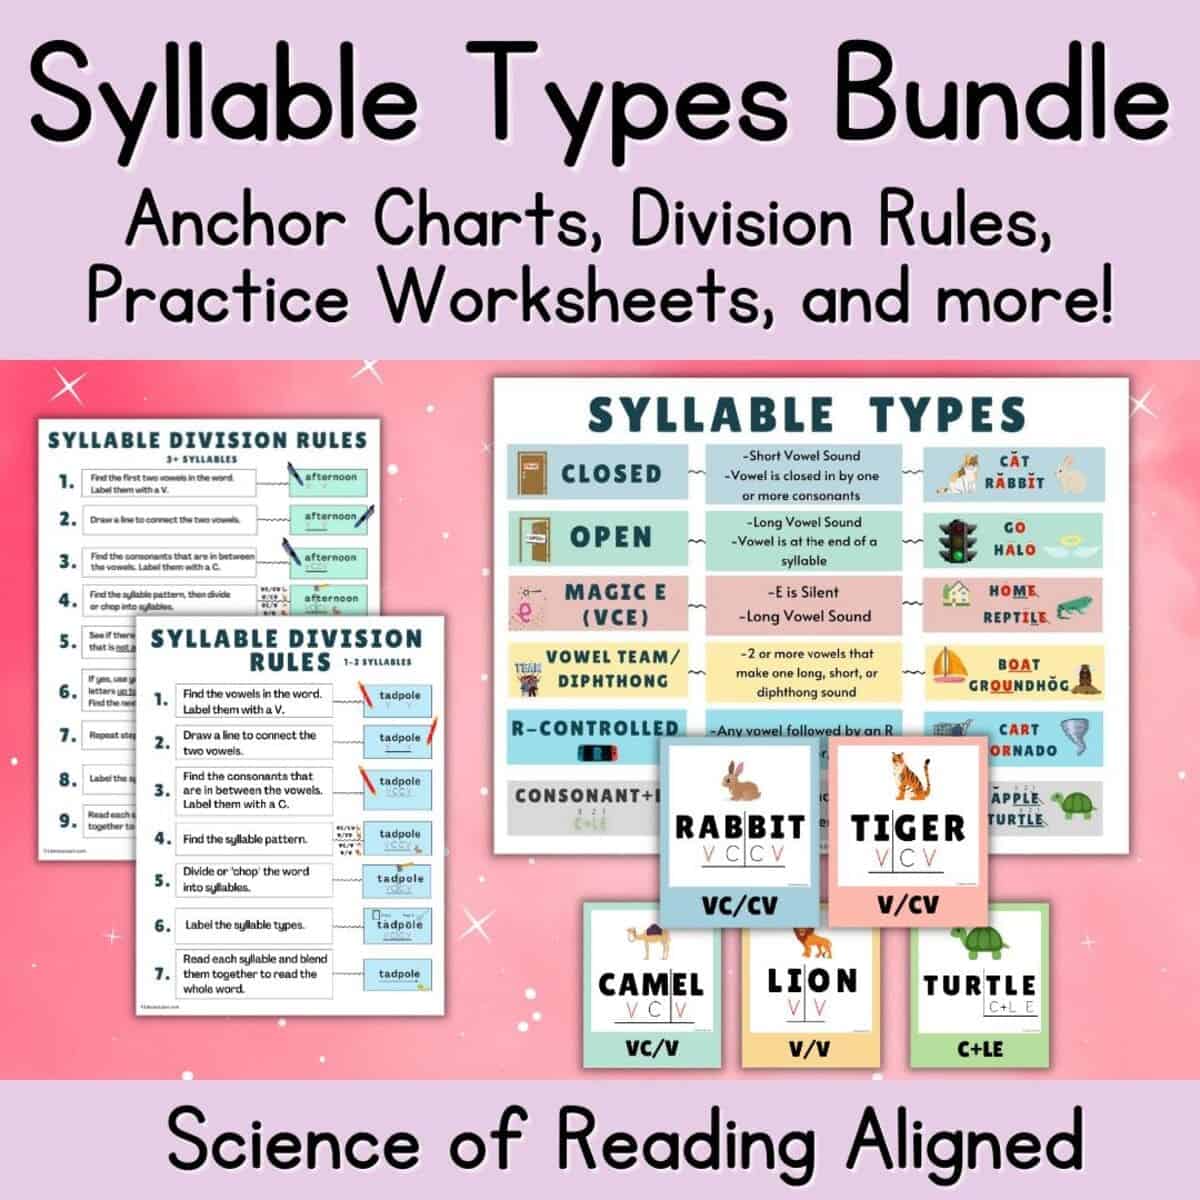 Pink image displaying syllable types bundle with images of the activities and materials included.